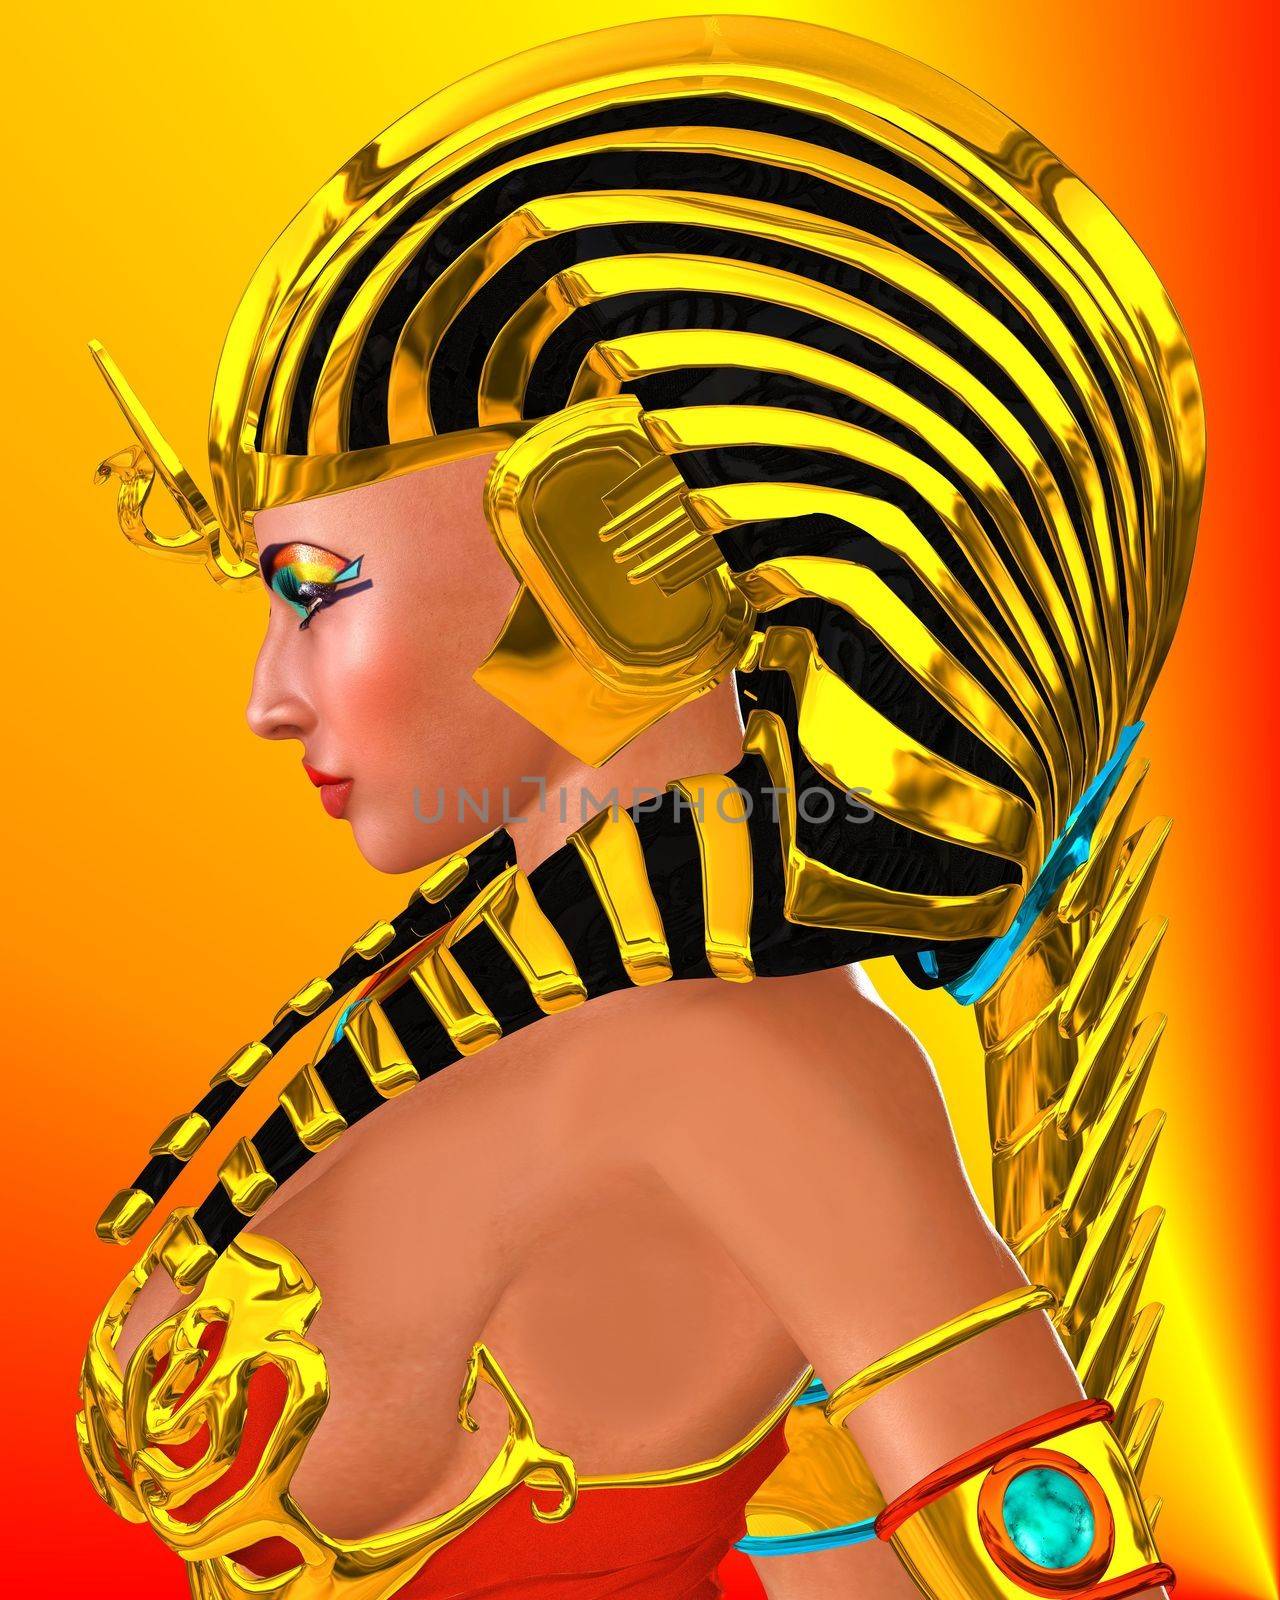 Profile of Egyptian woman Pharaoh Queen by TK0920